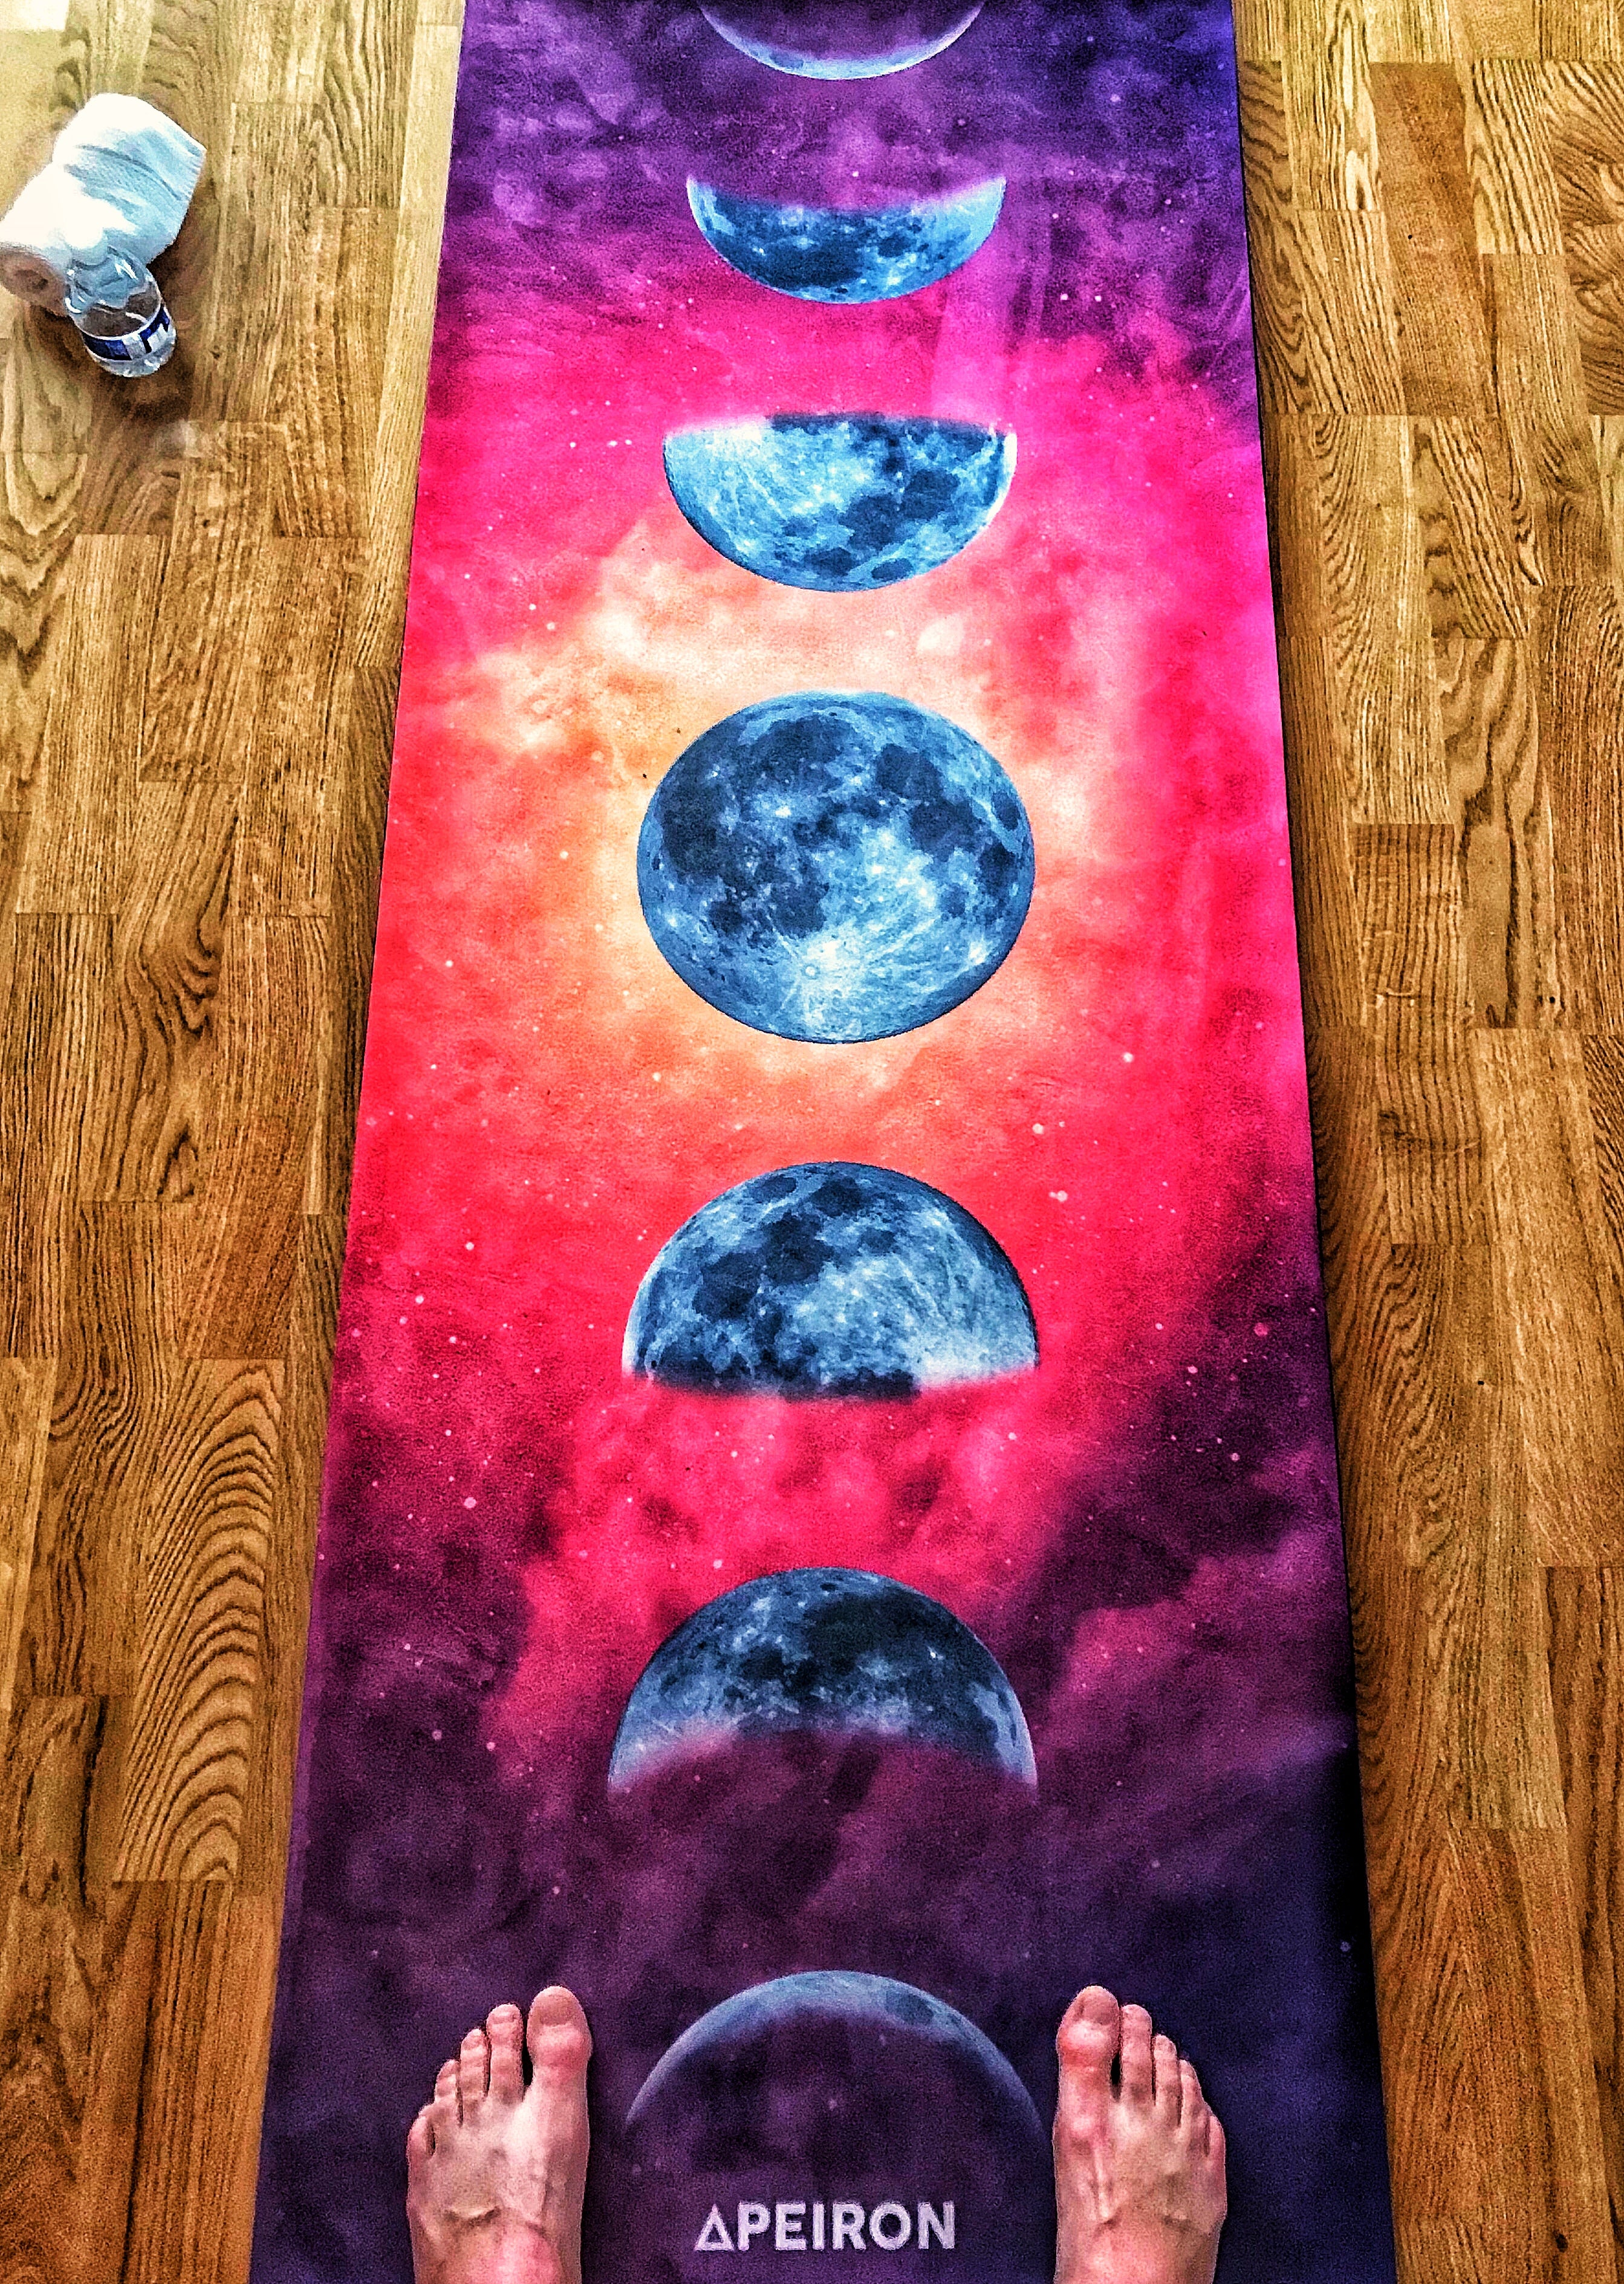 Just a Phase - eco friendly  yoga mat